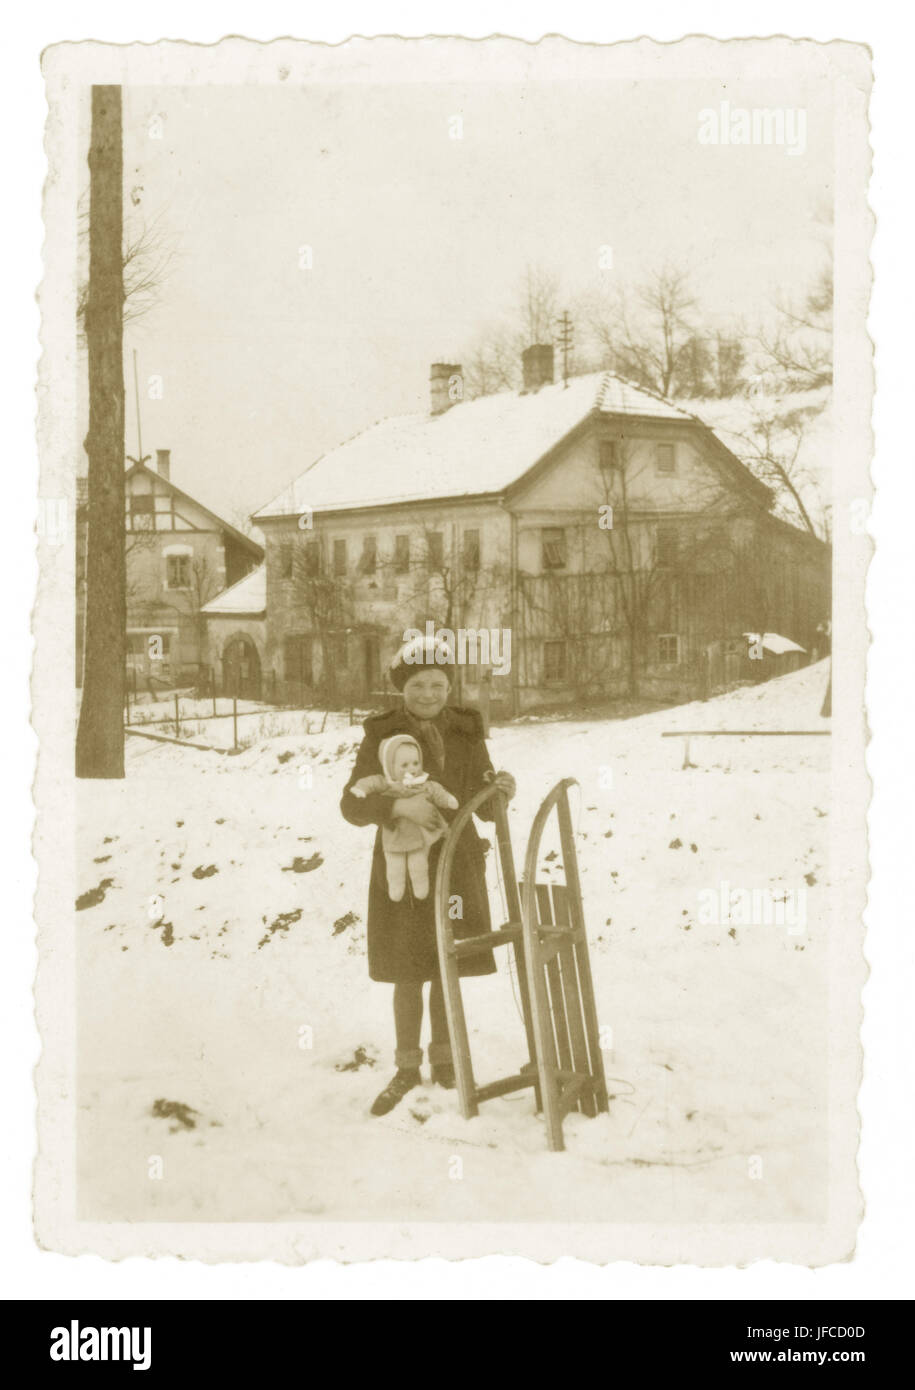 Young girl with sledge, Hochburg, Austria, 29 Dec. 1940. Stock Photo